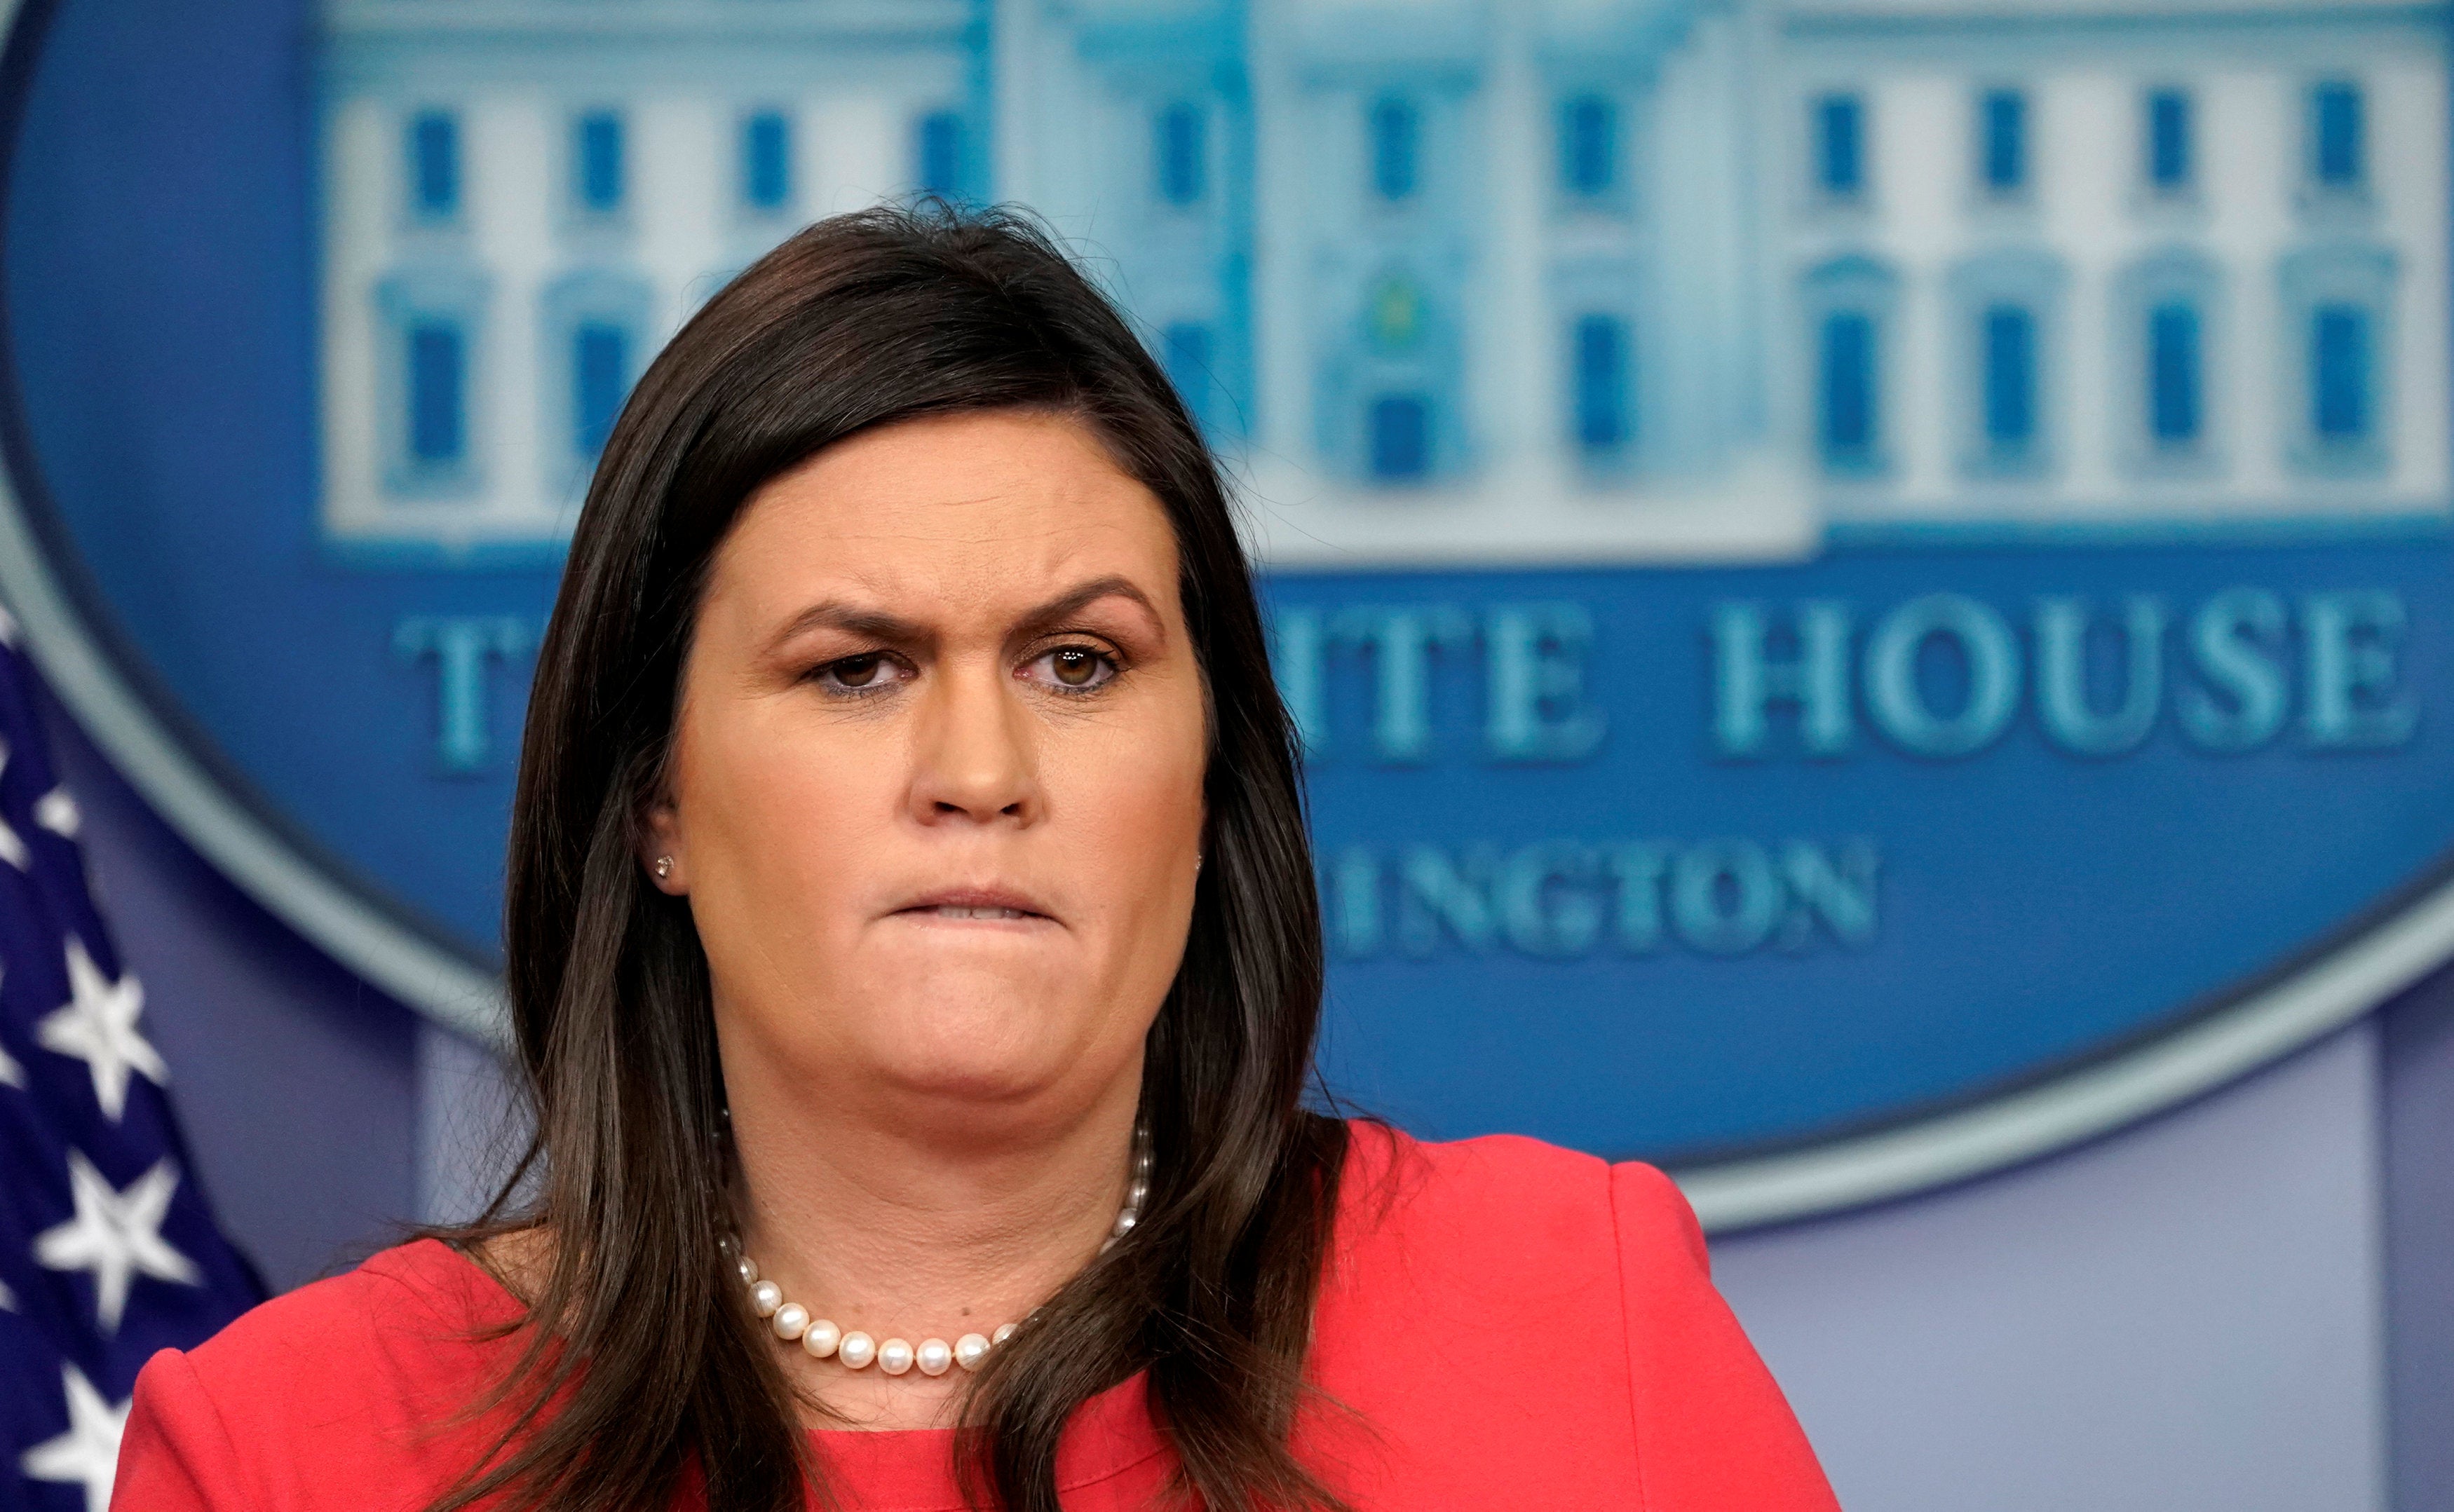 File image: Sarah Sanders complained about losing 50 thousand Twitter followers, got schooled by high school teacher